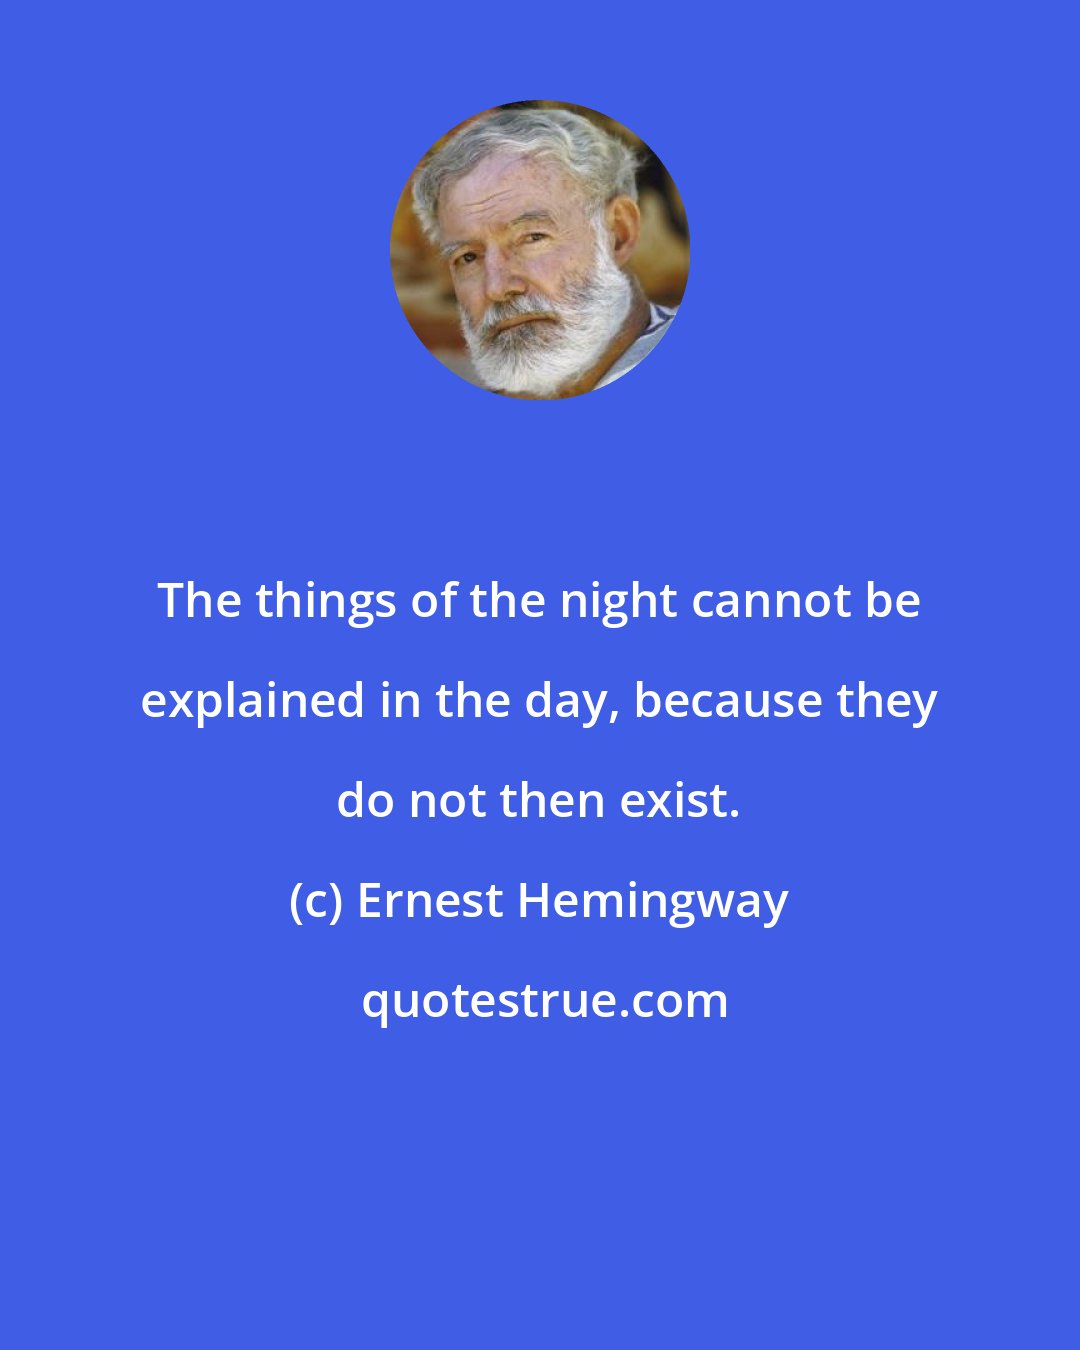 Ernest Hemingway: The things of the night cannot be explained in the day, because they do not then exist.